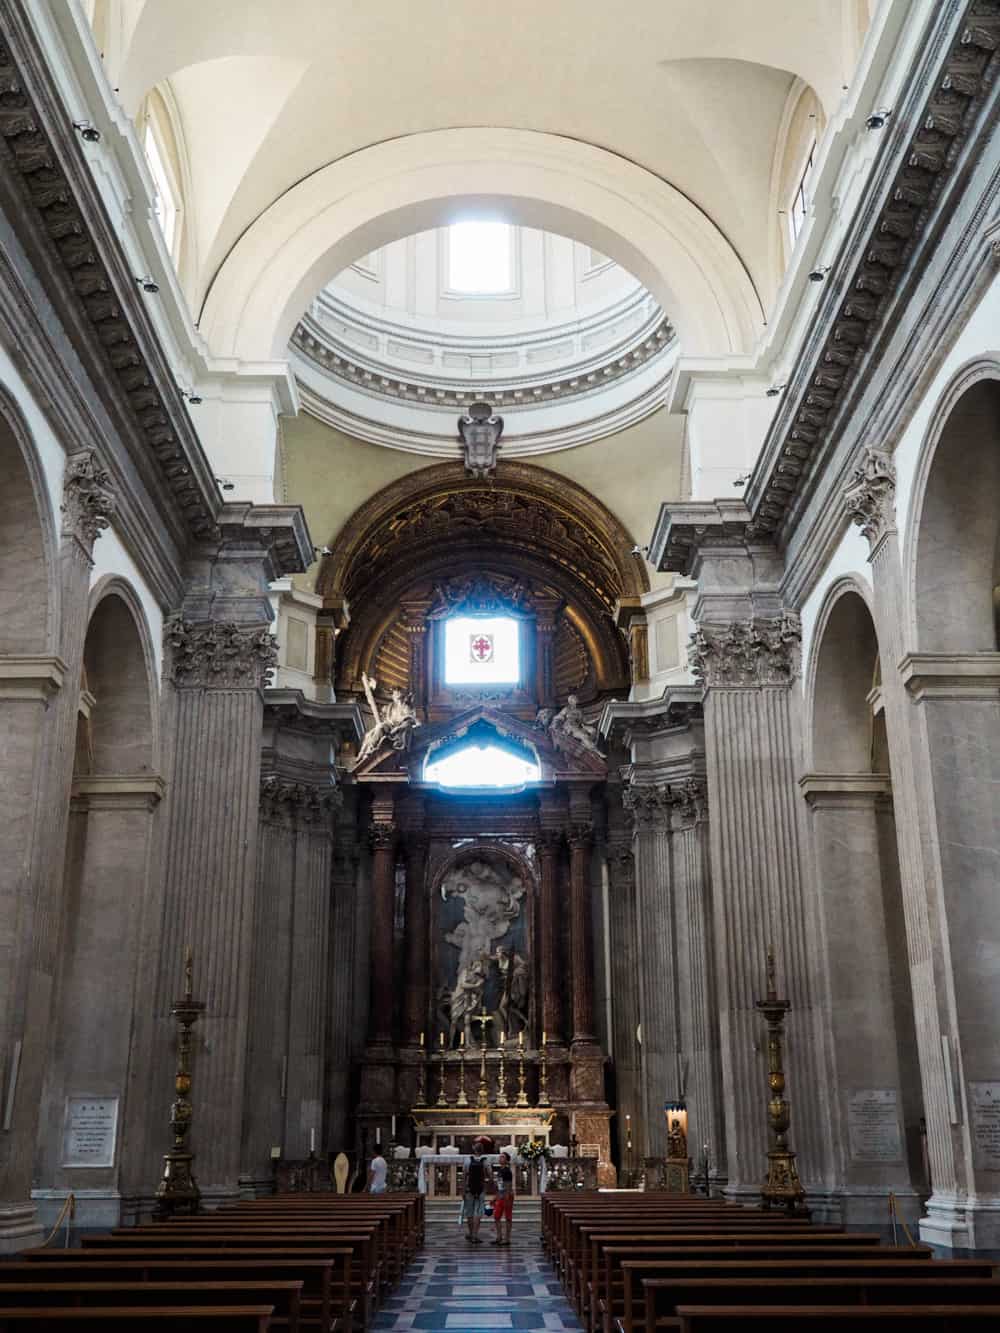 San Giovanni dei Fiorentini church is the national church of Florence in Rome dedicated to John the Baptist. The church's groundbreaking began in the 1500s, but was not finished until 1700s. | via Autumn All Along